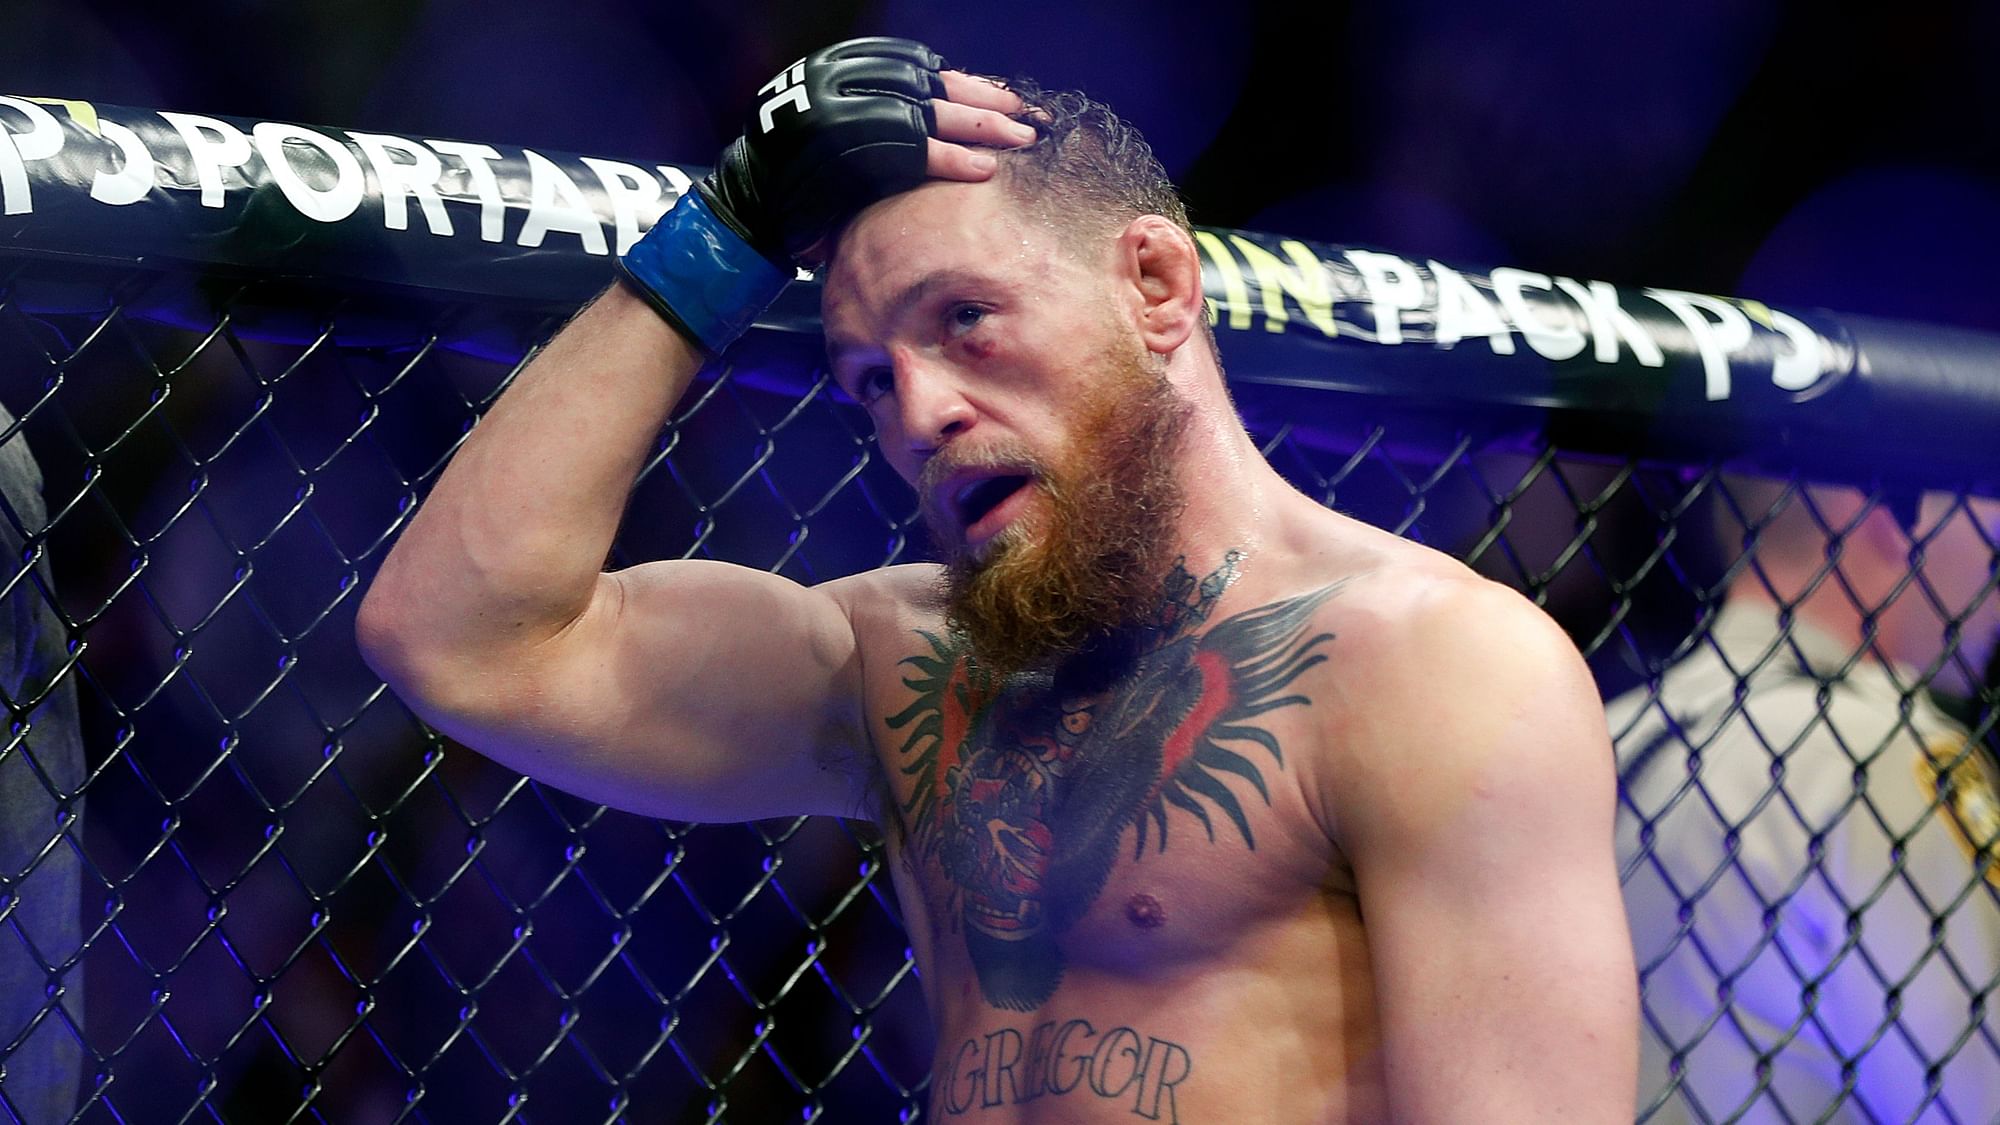 Conor McGregor reacts after losing to Khabib Nurmagomedov in a lightweight title mixed martial arts bout at UFC 229 in Las Vegas, Saturday, Oct. 6, 2018. Nurmagomedov won the fight by submission during the fourth round to retain the title.